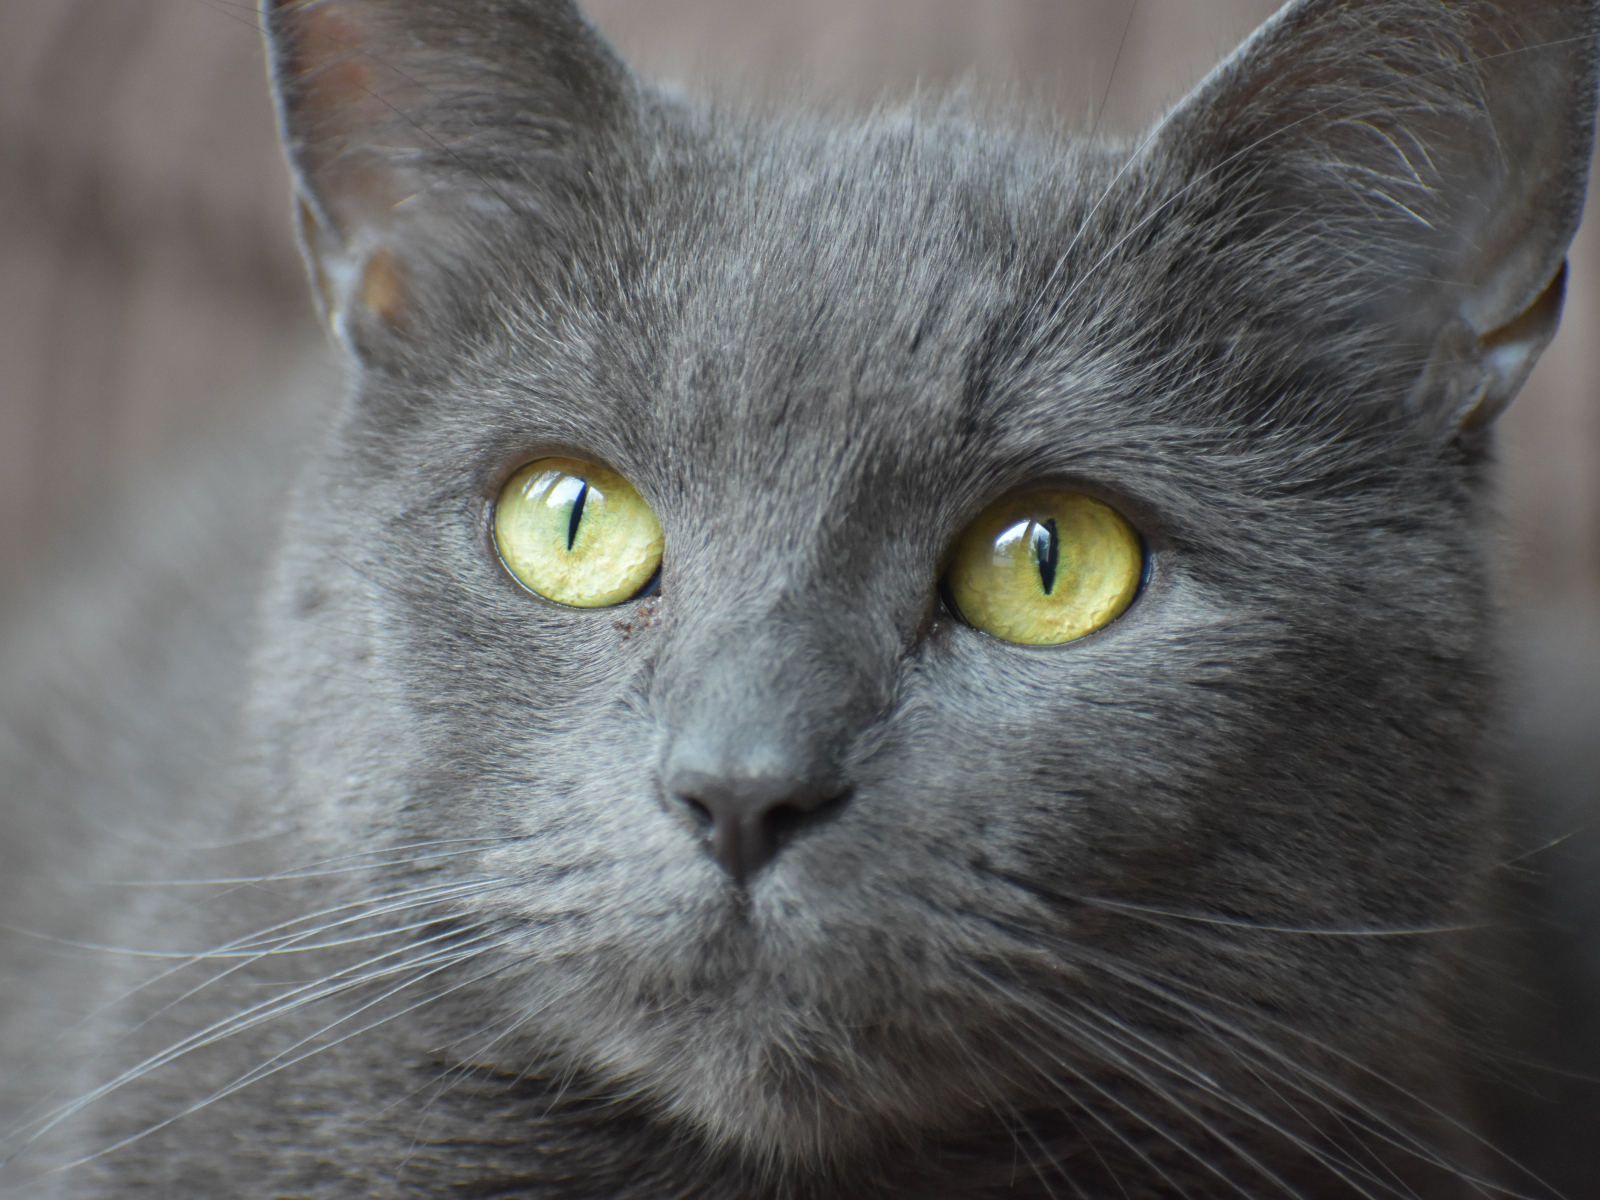 Russian Blue, Korat Or Chartreux? TheCatSite